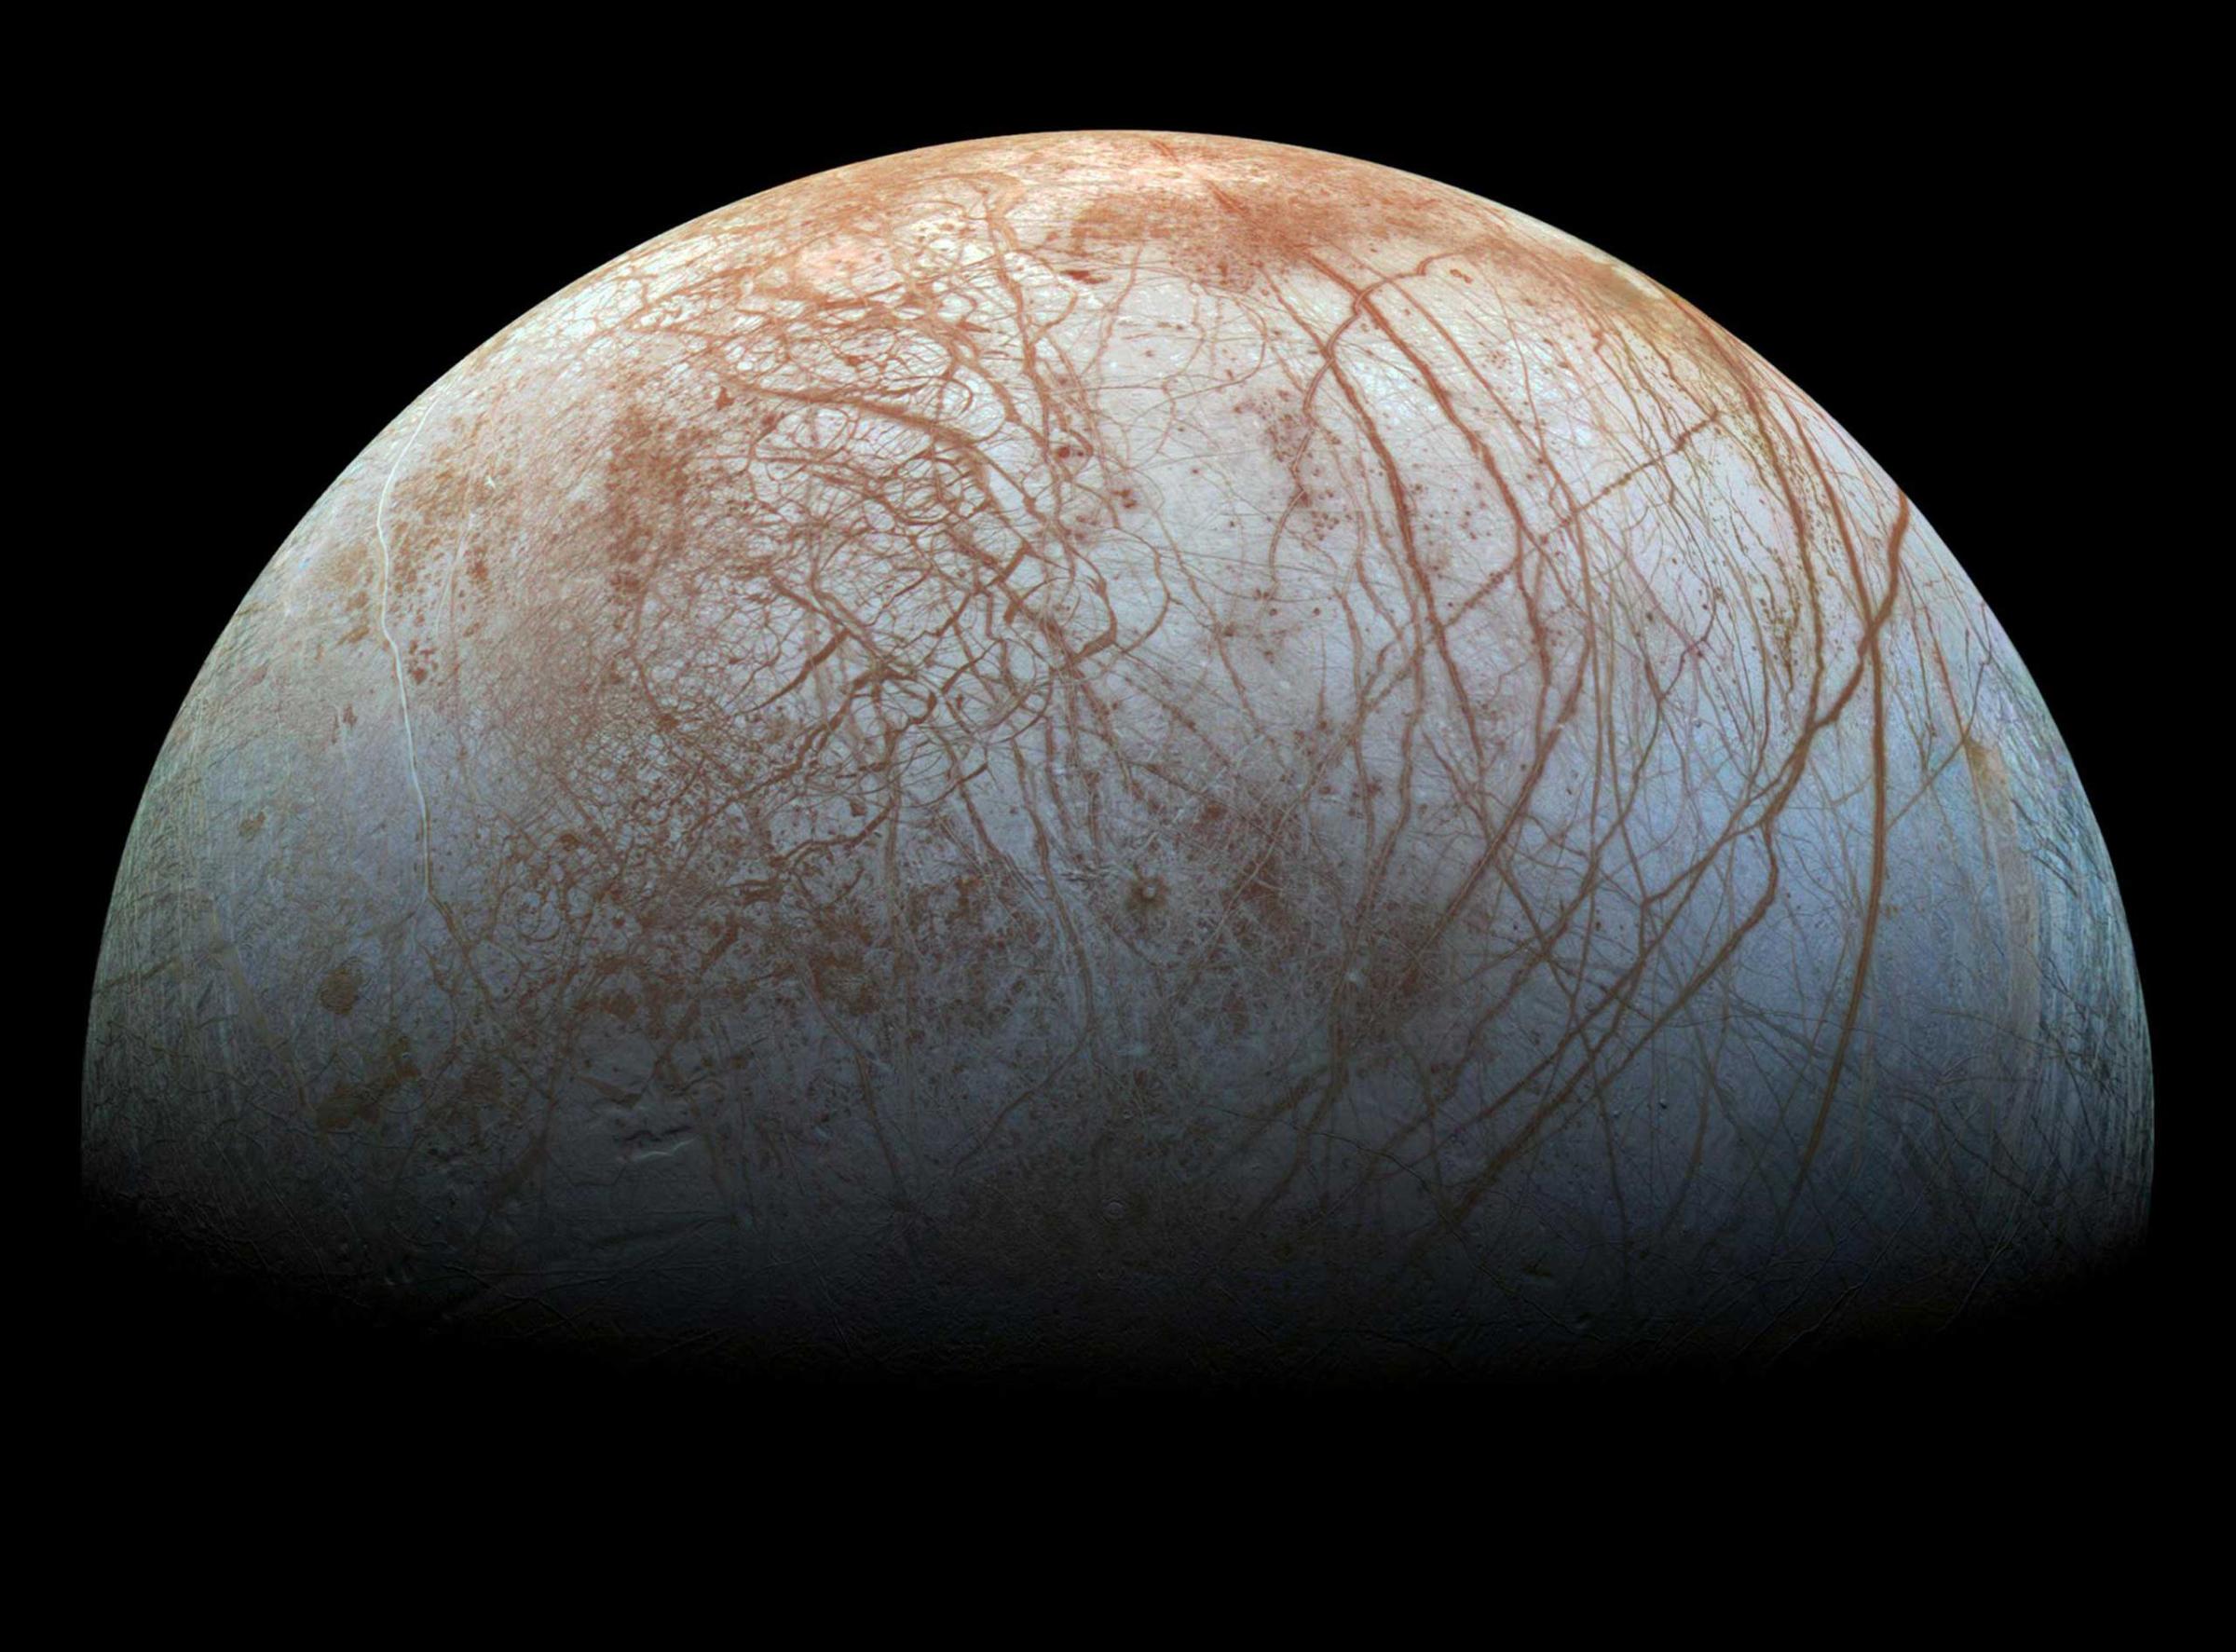 A reprocessed picture shows off the amazing colors of Europa, a mysterious ice-covered moon of Jupiter, as they have never been seen before released on Nov. 21, 2014.